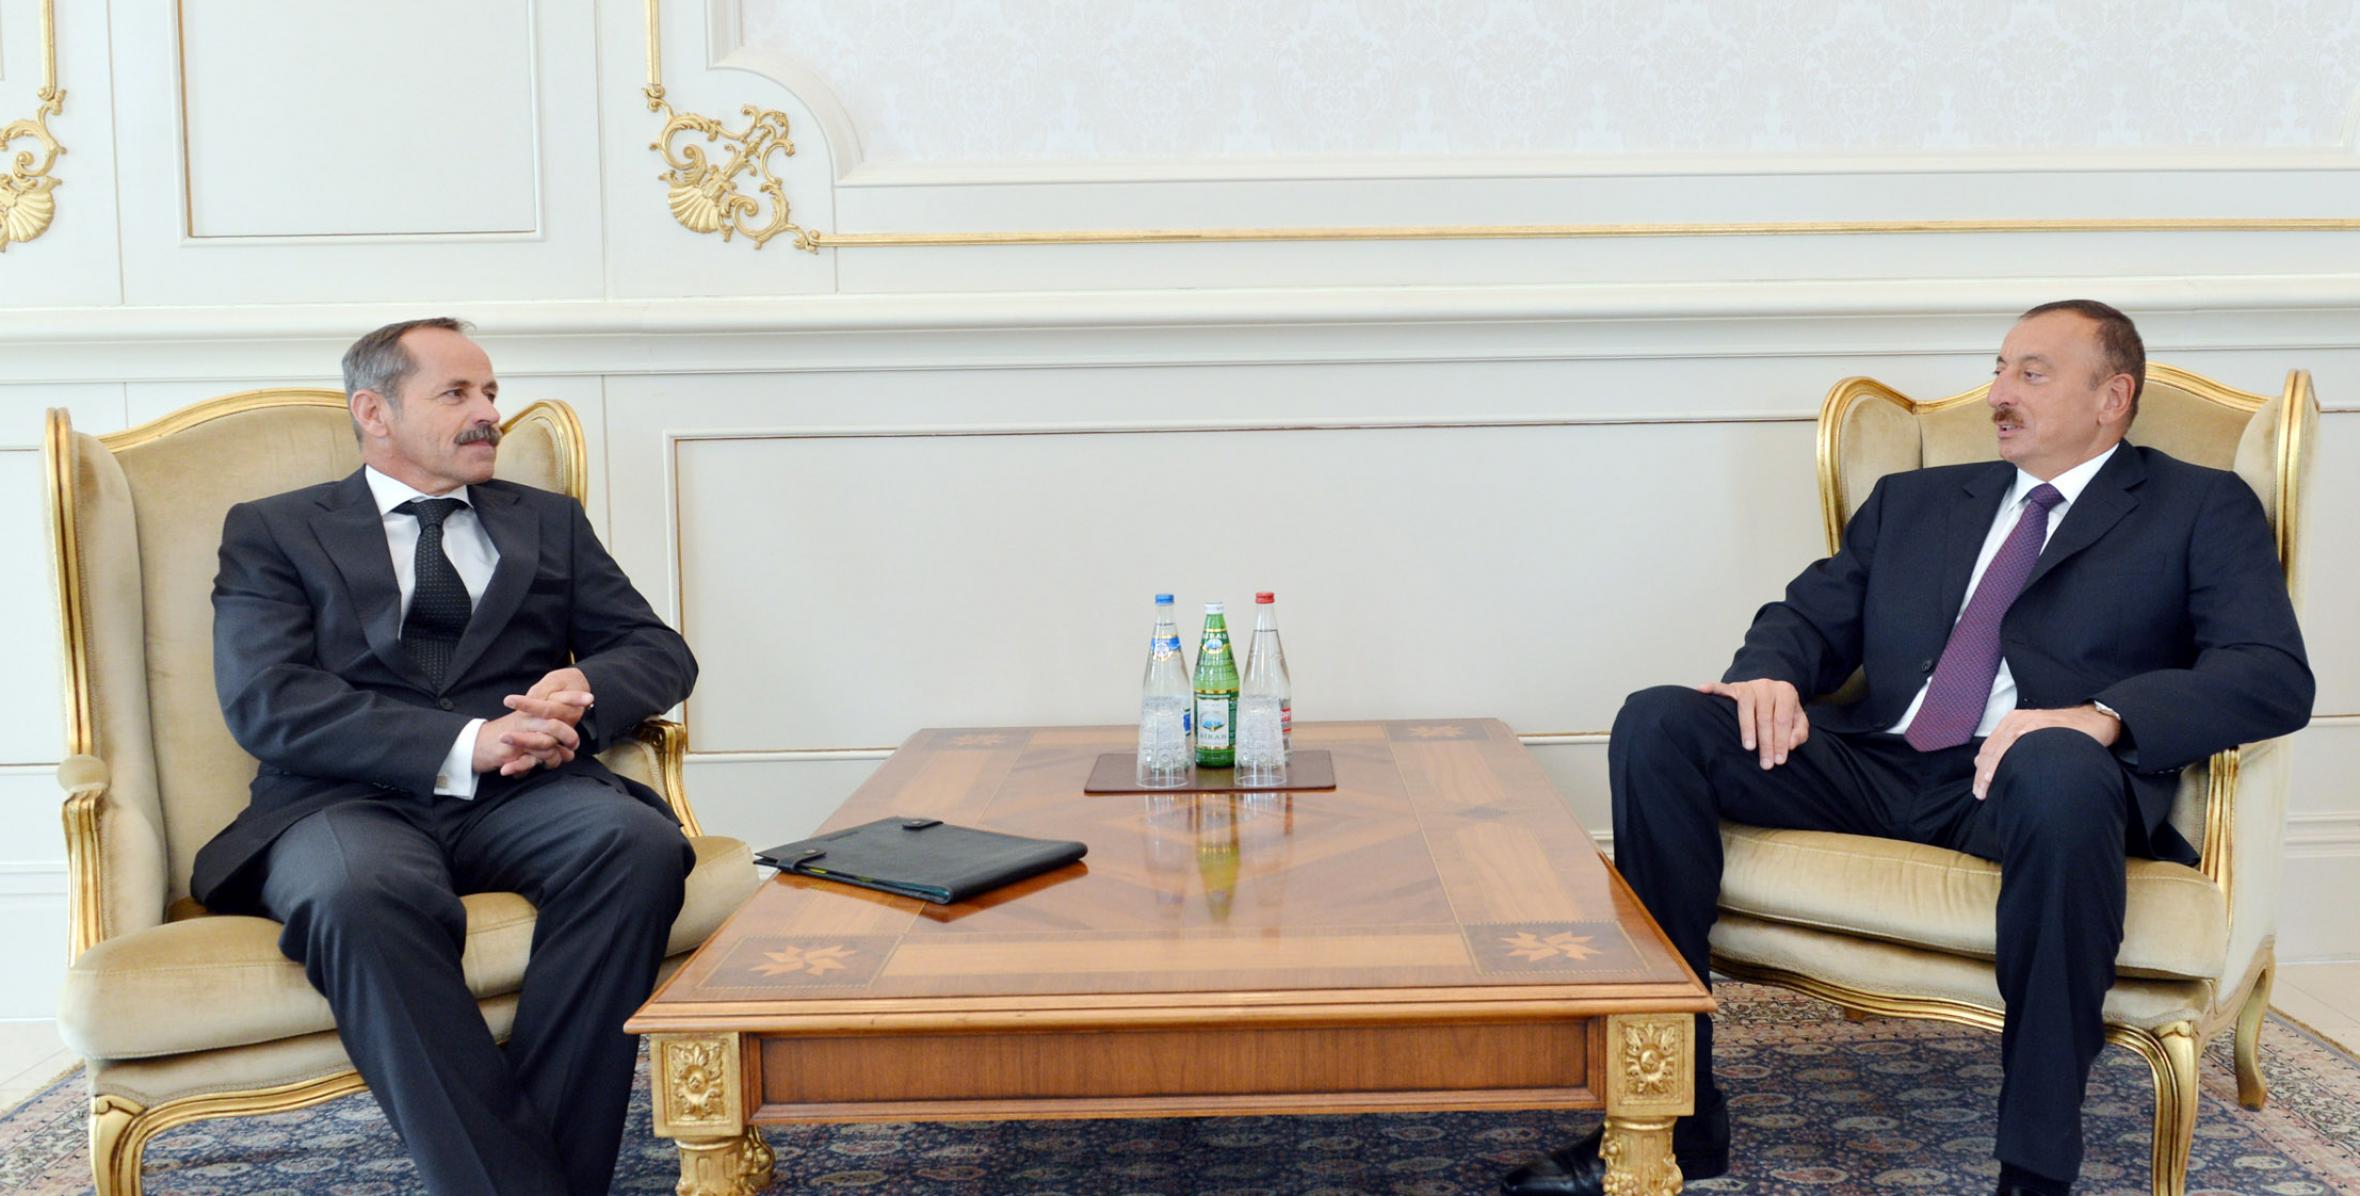 Ilham Aliyev received the credentials of the newly appointed Ambassador of Switzerland to Azerbaijan